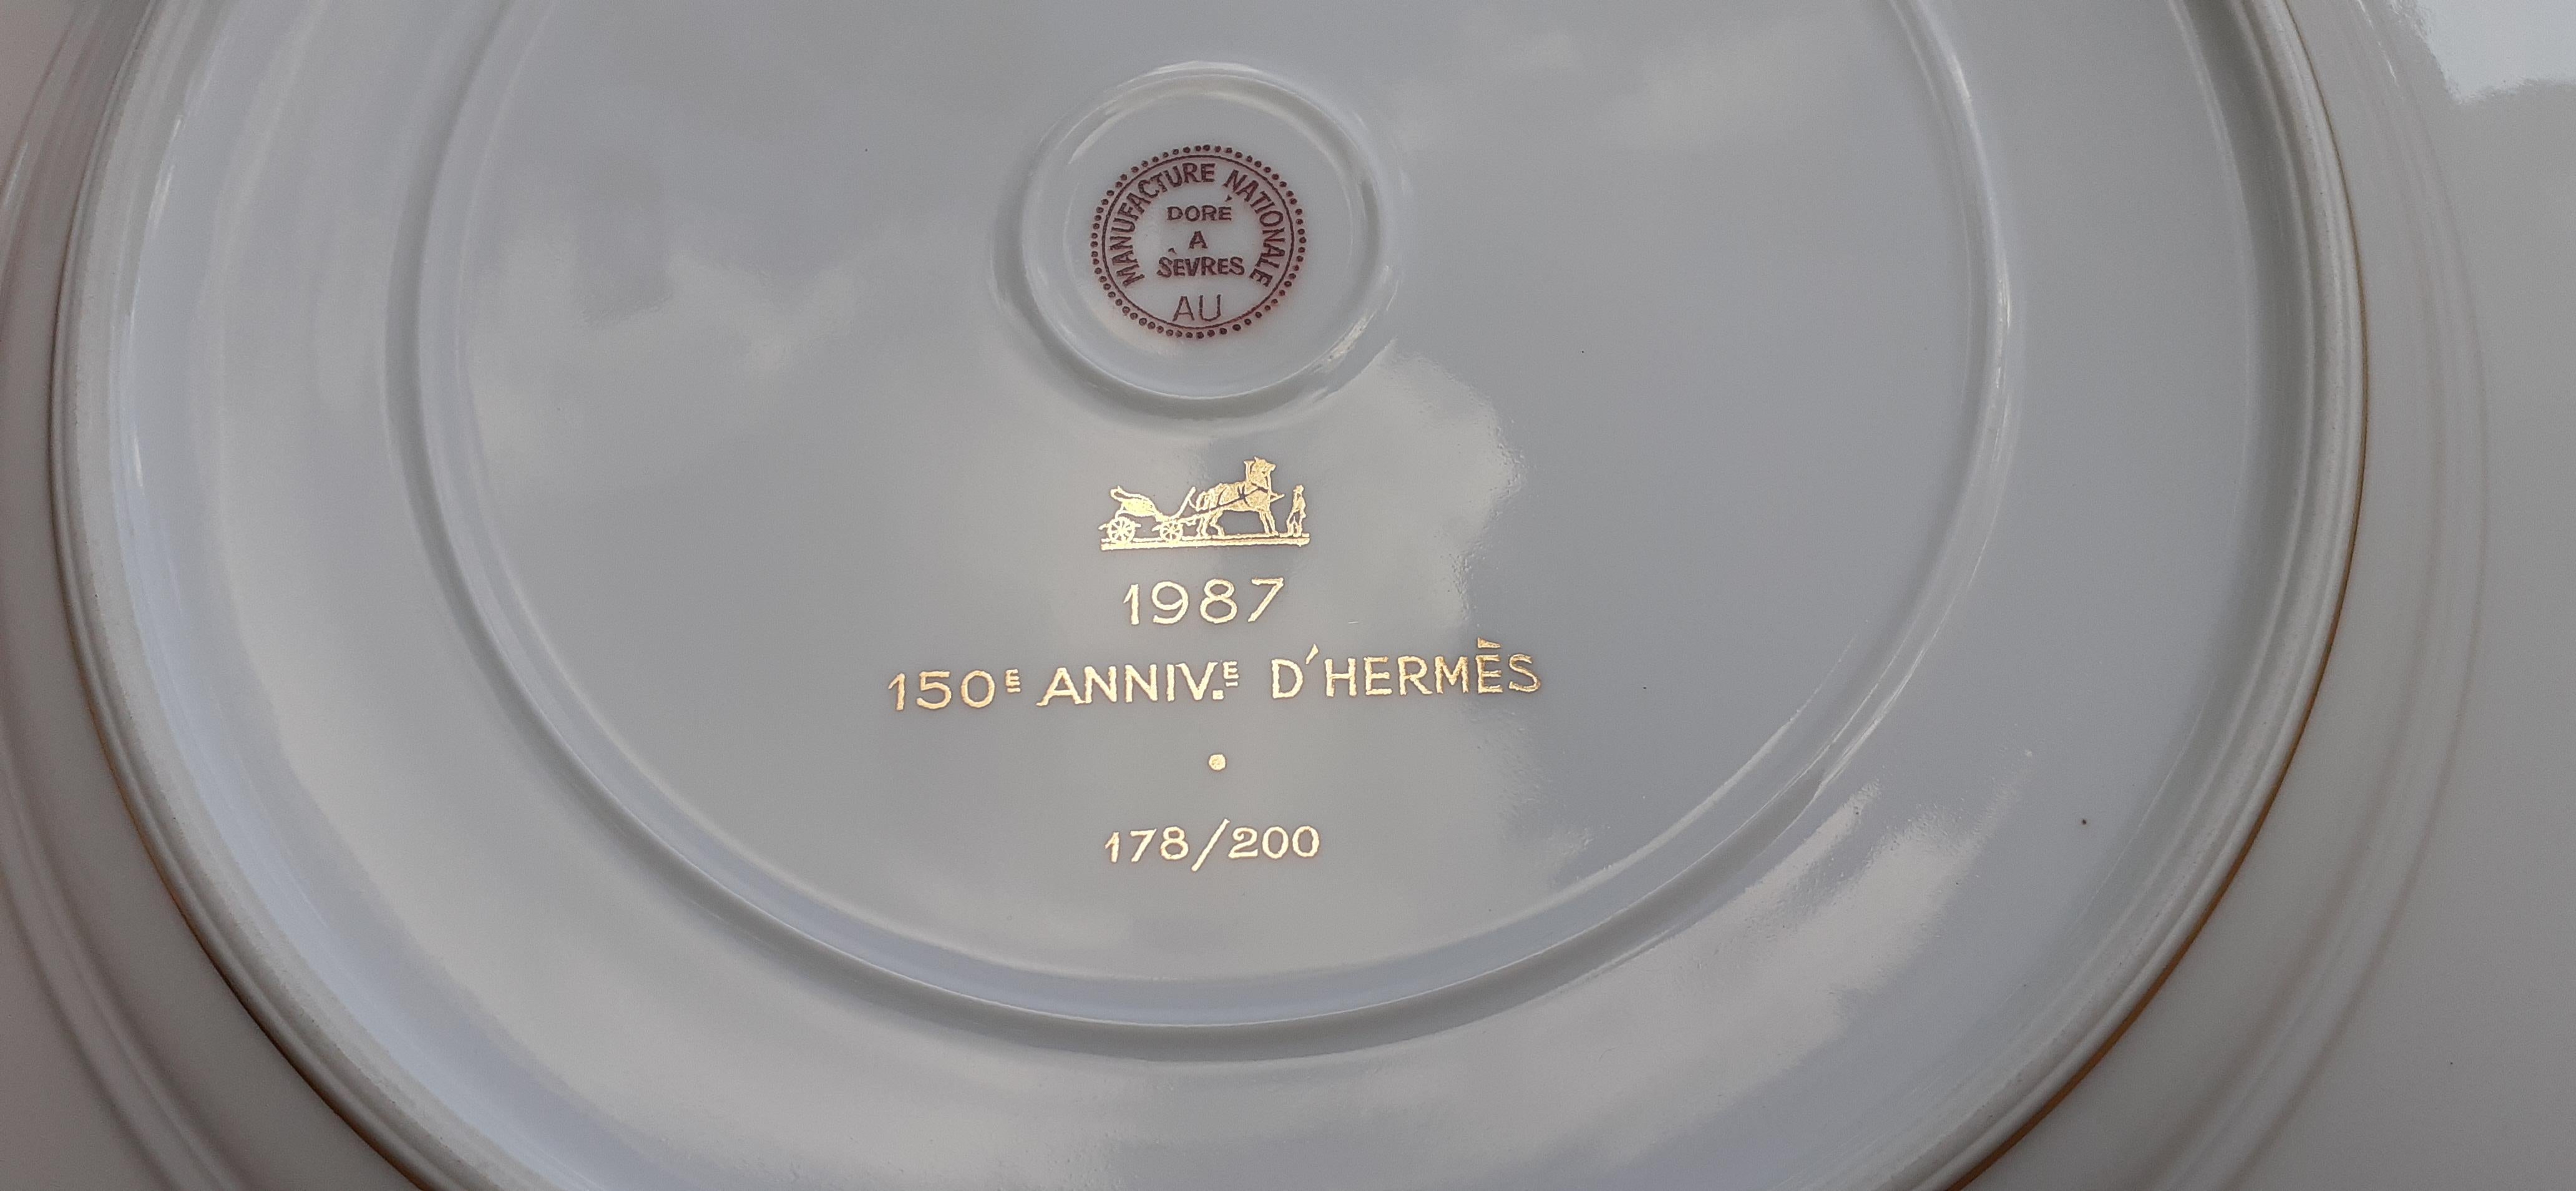 Exceptional Hermès Plate Dish Feux d'Artifice 150th Anniversary Only 200 Pieces For Sale 6